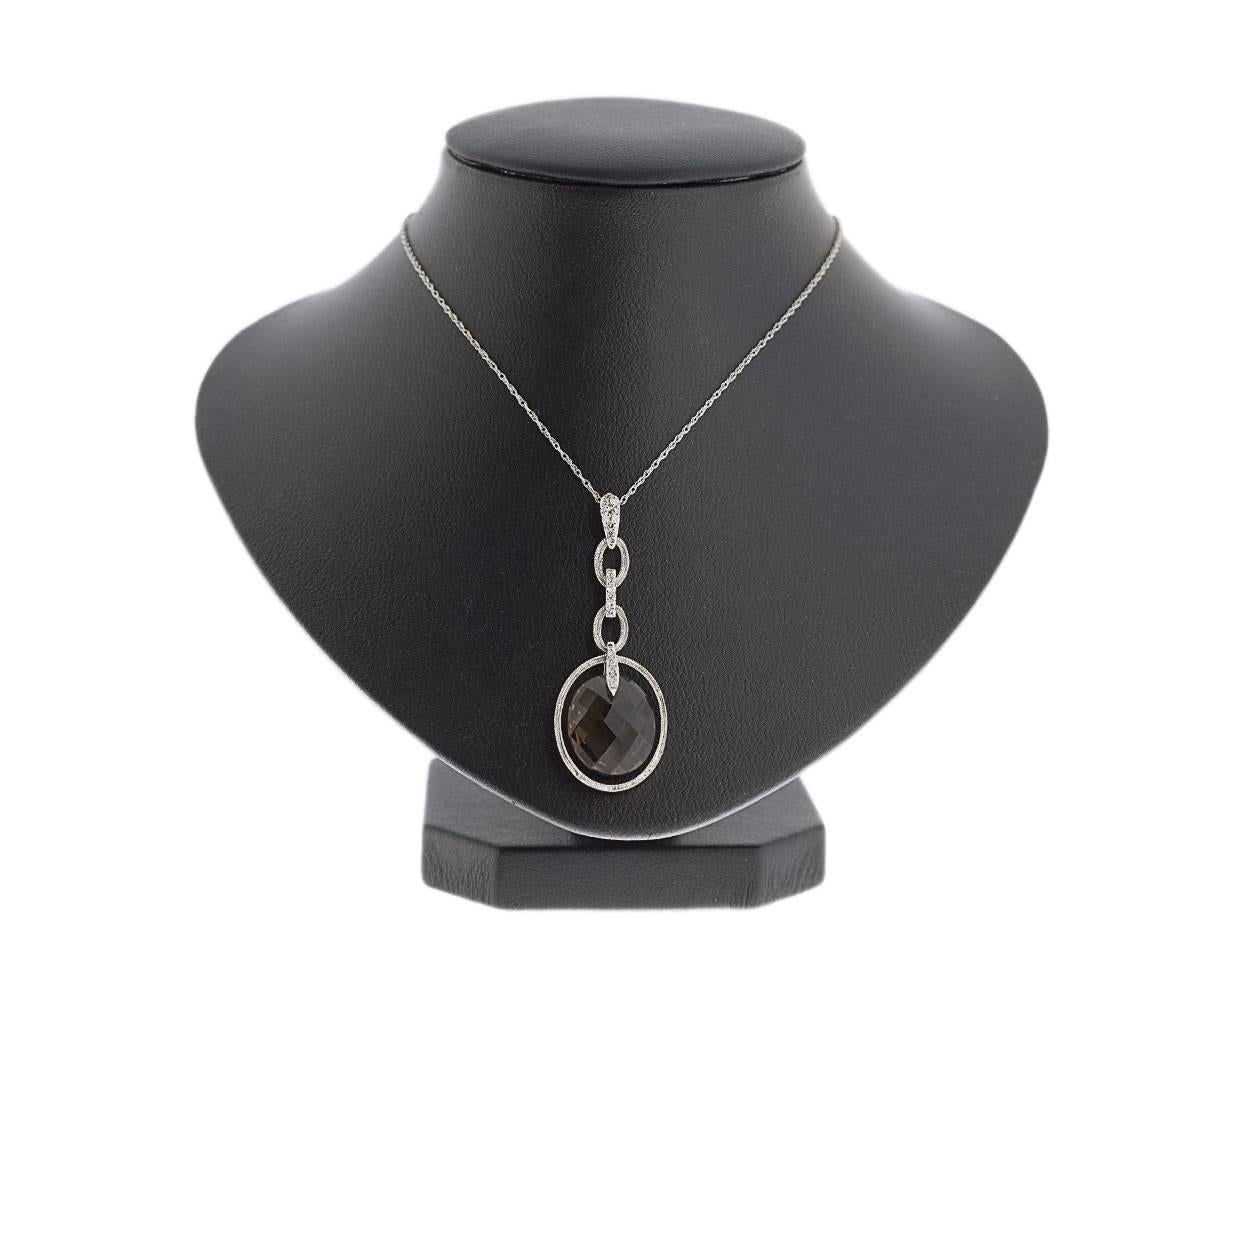 Simple yet elegant & beautiful would be the best way to describe this stunning pendant! It features a 14 x 12 millimeter, double sided, checkerboard faceted, oval smoky quartz. This lovely smoky quartz is suspended in the center of a white gold